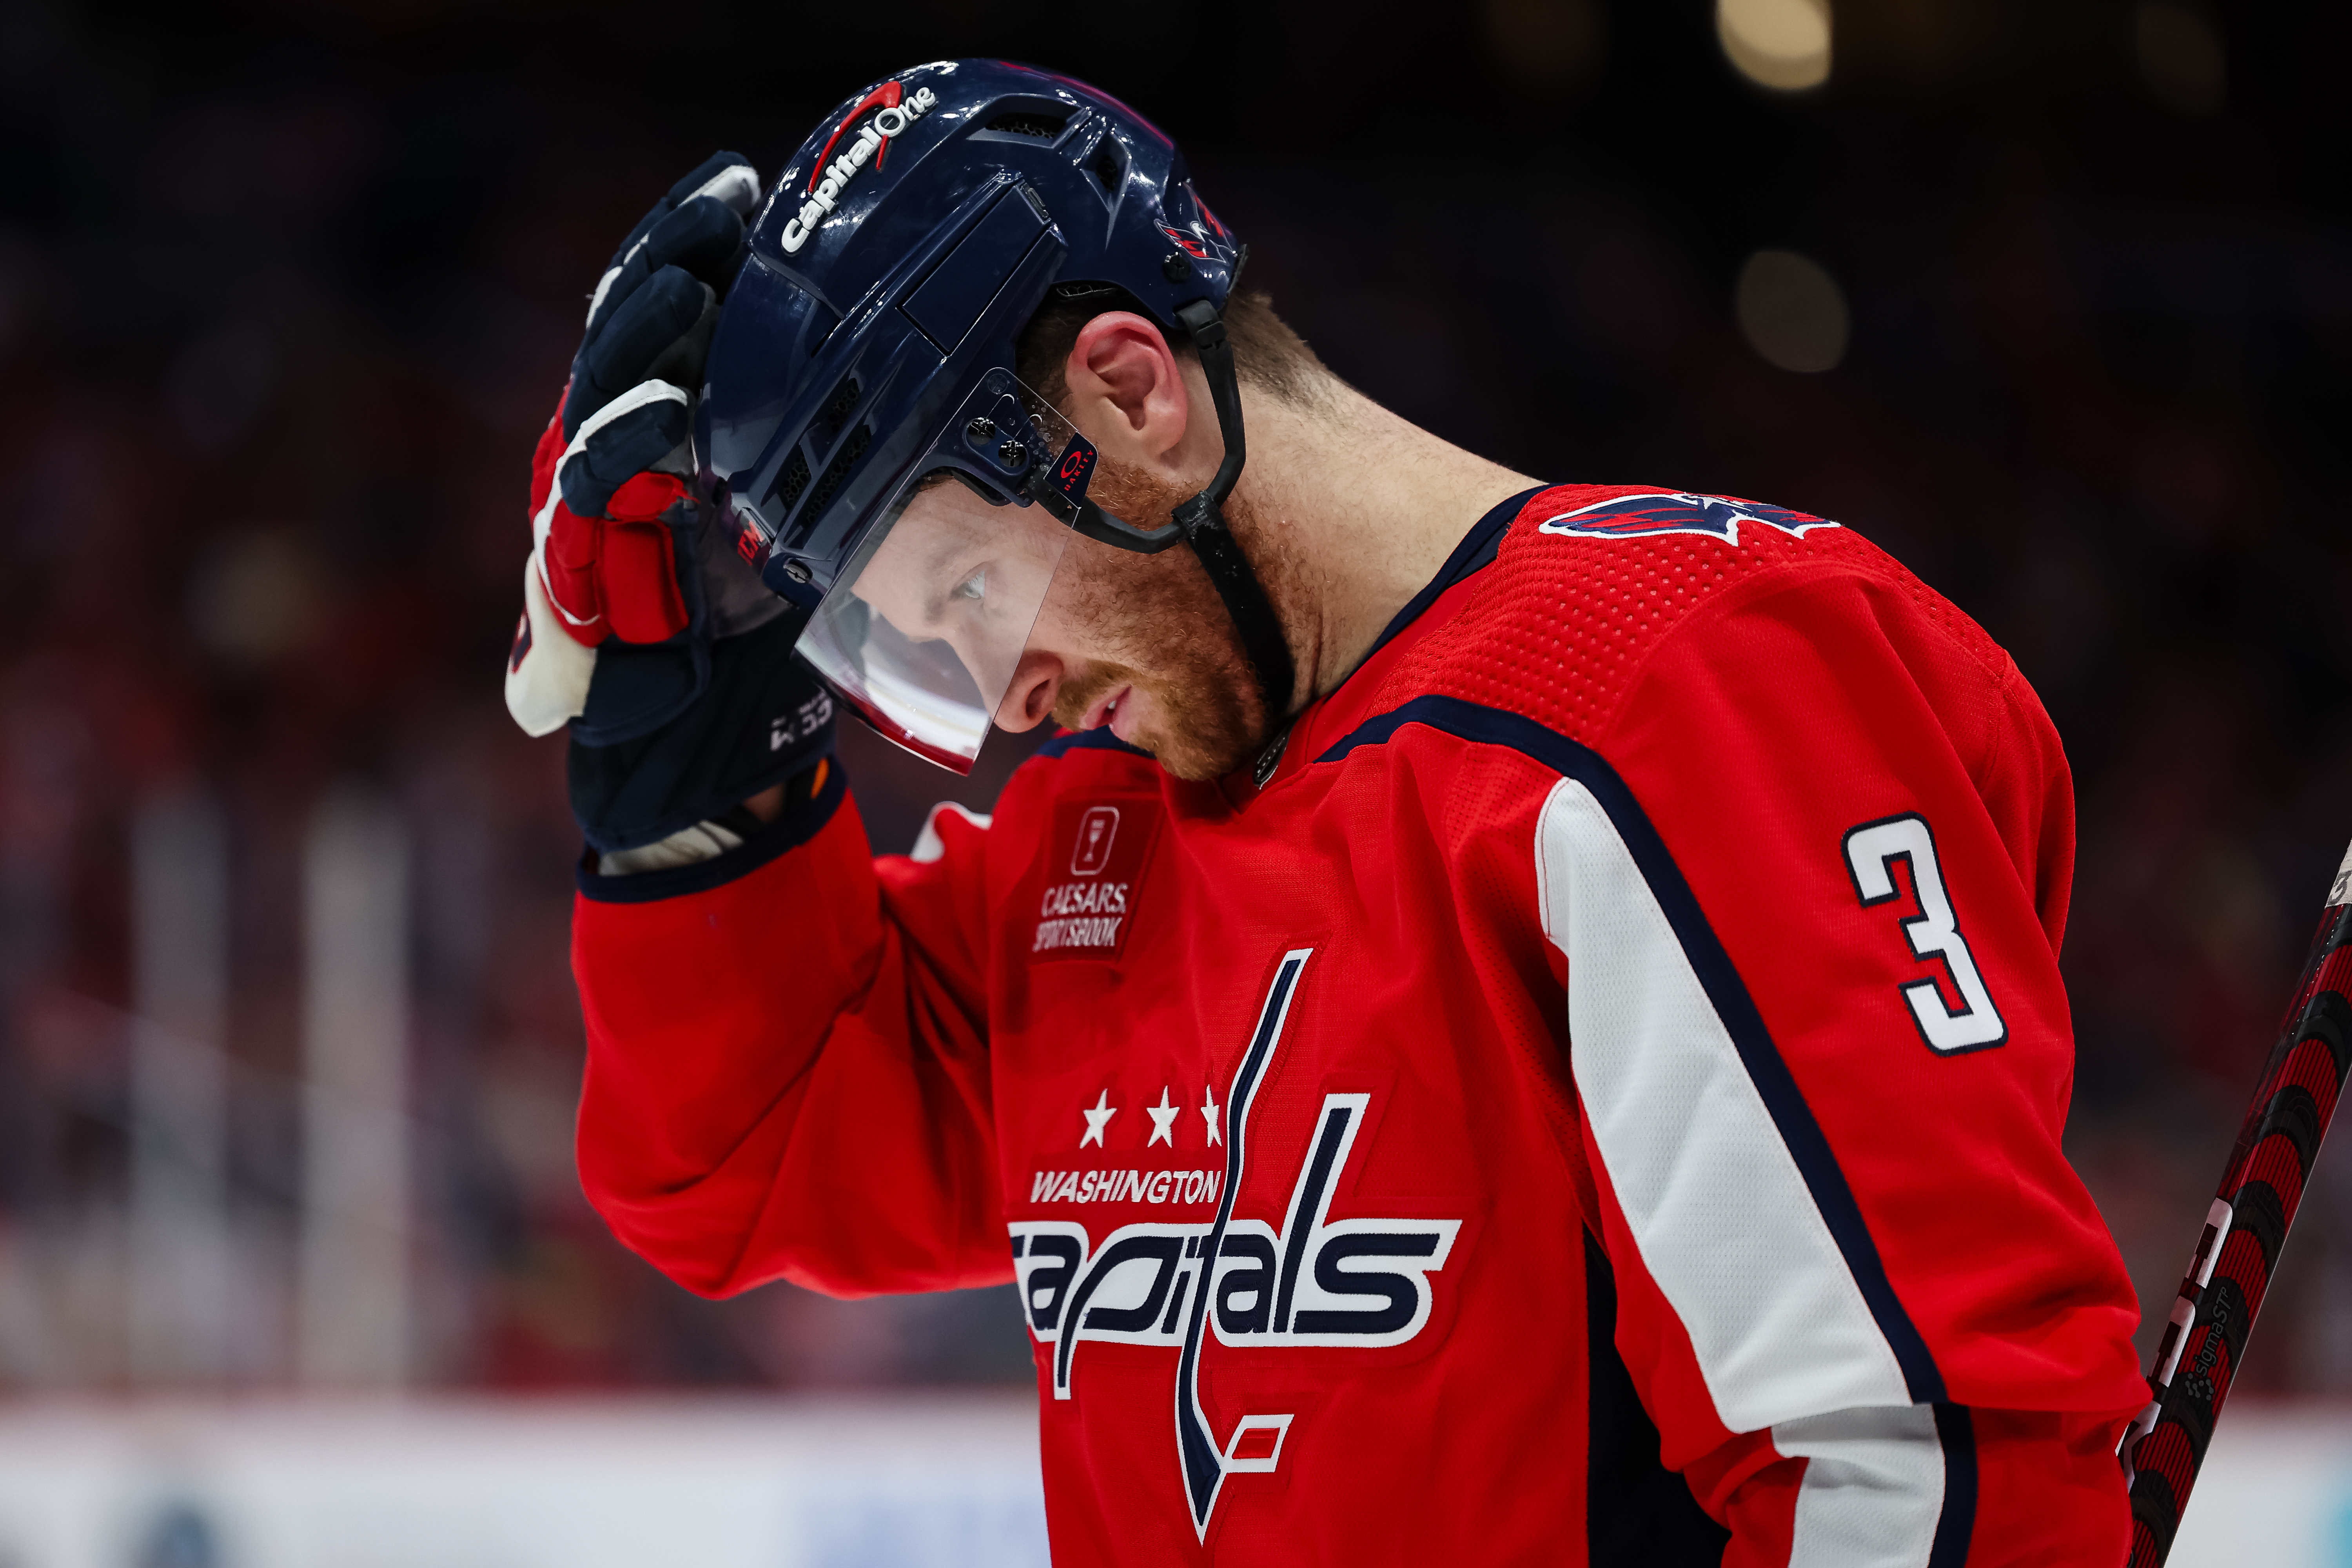 Capitals' Nick Jensen is conscious and alert after being stretchered
off the ice